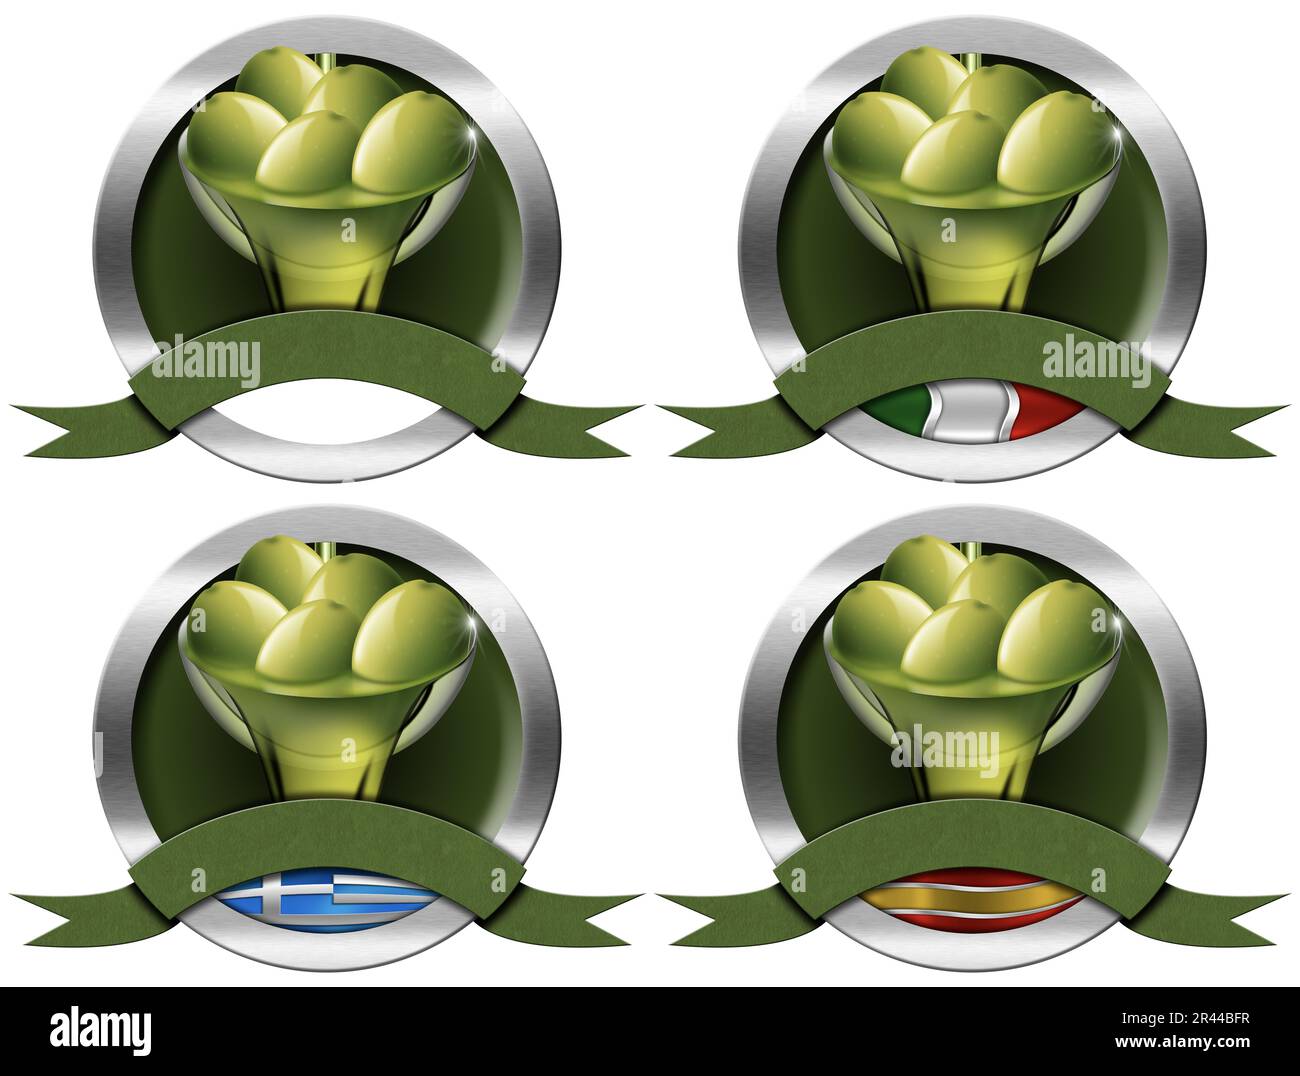 Metallic round signs with green olives, olive oil and copy space. Isolated on white background, 3D illustration. Italian, Greek and Spanish flags. Stock Photo